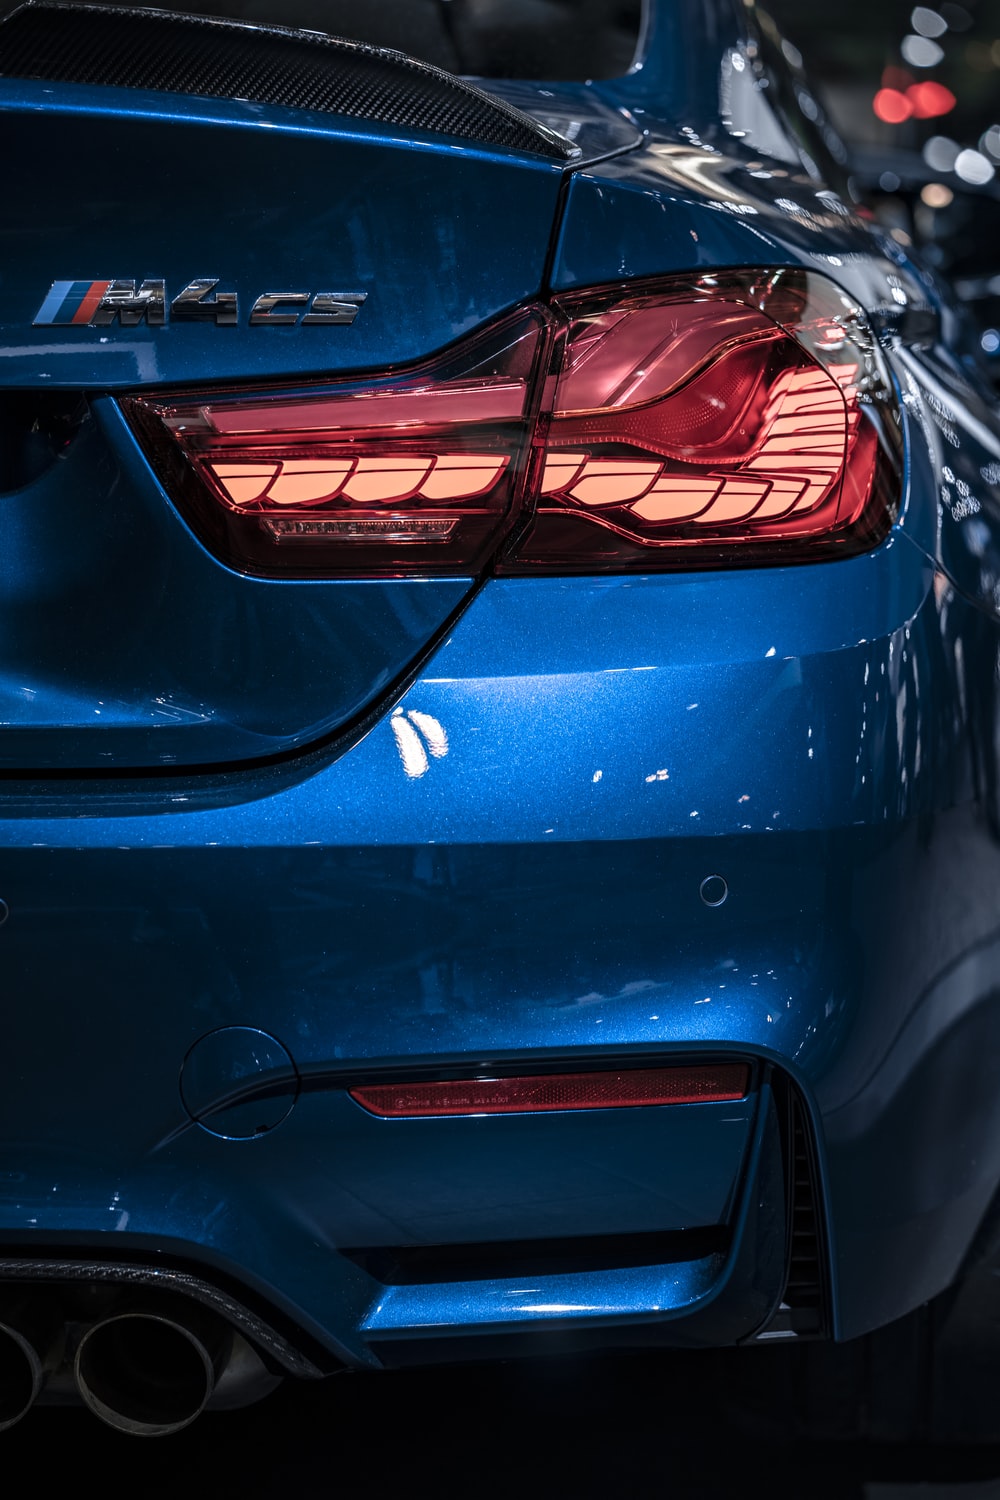 Bmw Lights Picture. Download Free Image